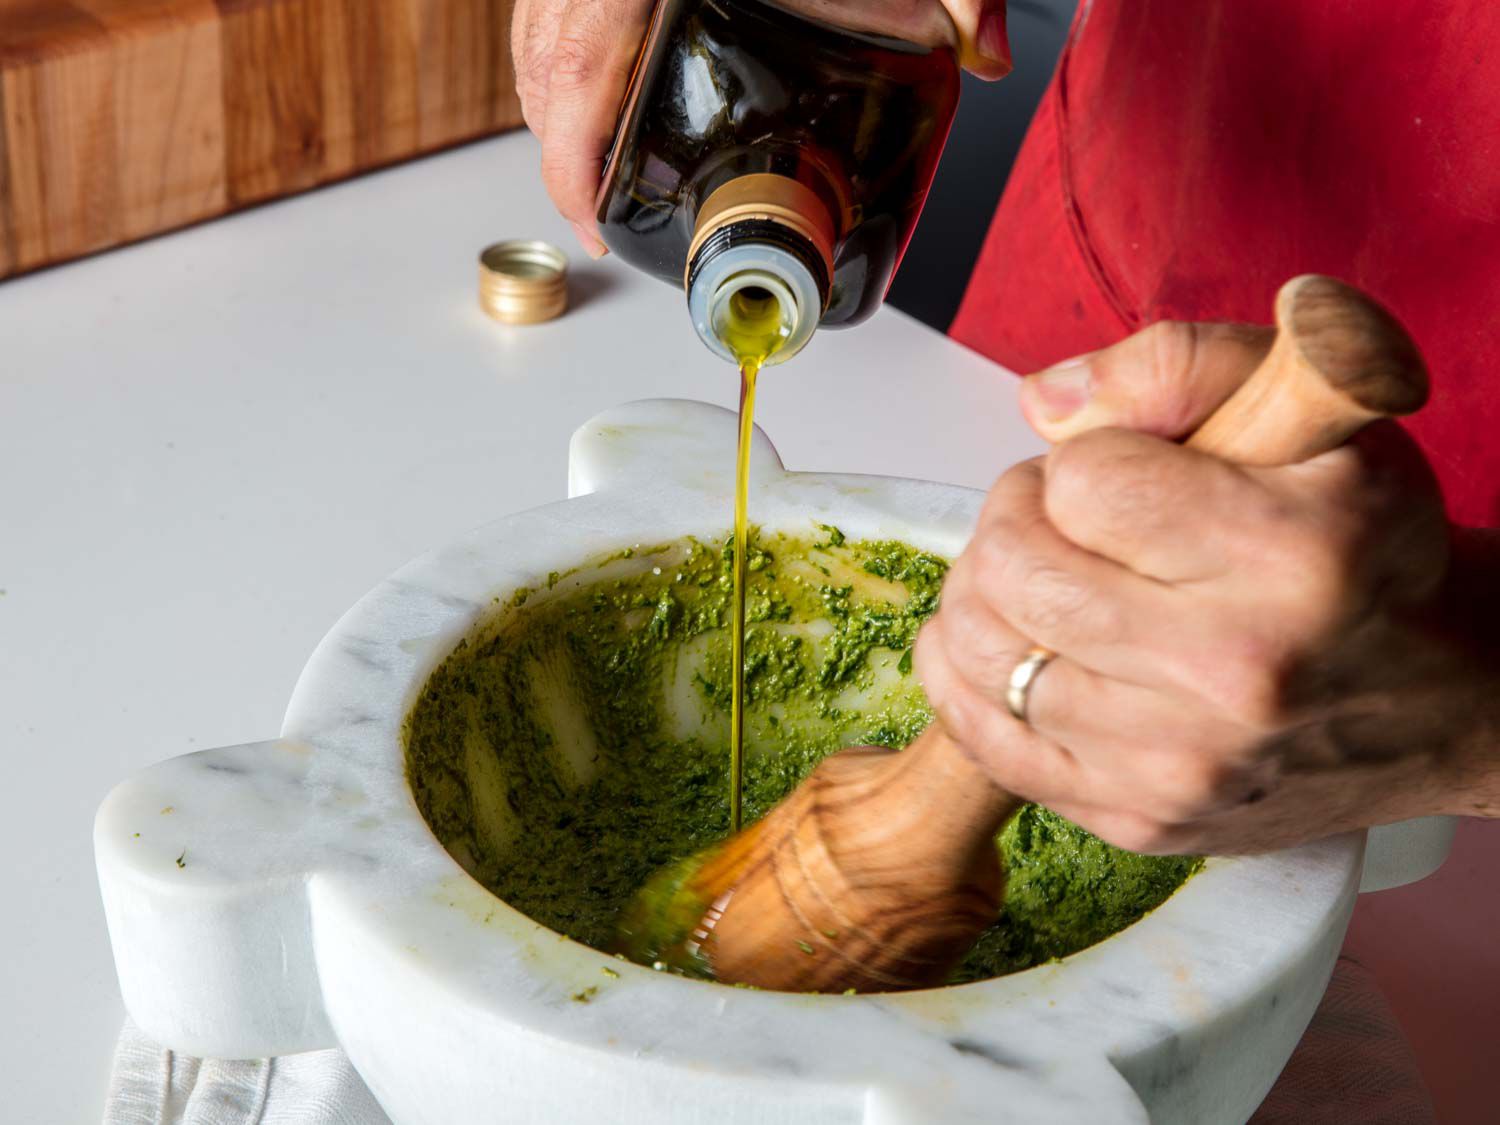 Drizzling olive oil into basil, pine nut, and garlic paste in a marble mortar to make into traditional pesto sauce.